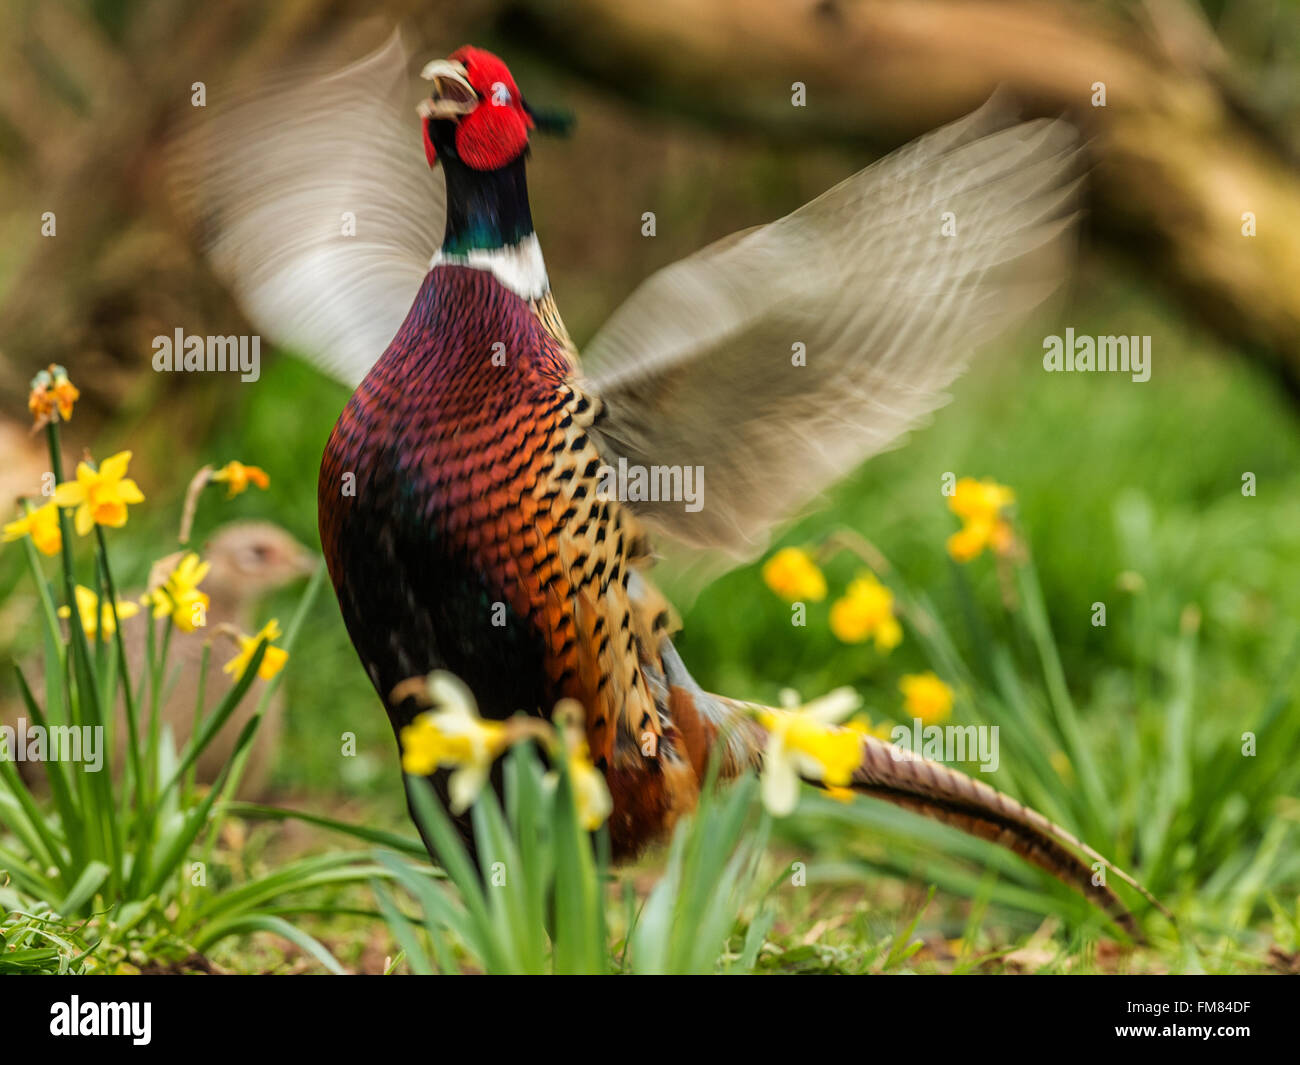 Beautiful Male Ring-necked Pheasant (Phasianus colchicus). Depicted 'Crowing' against a woodland backdrop. Wing Motion Blur. Stock Photo